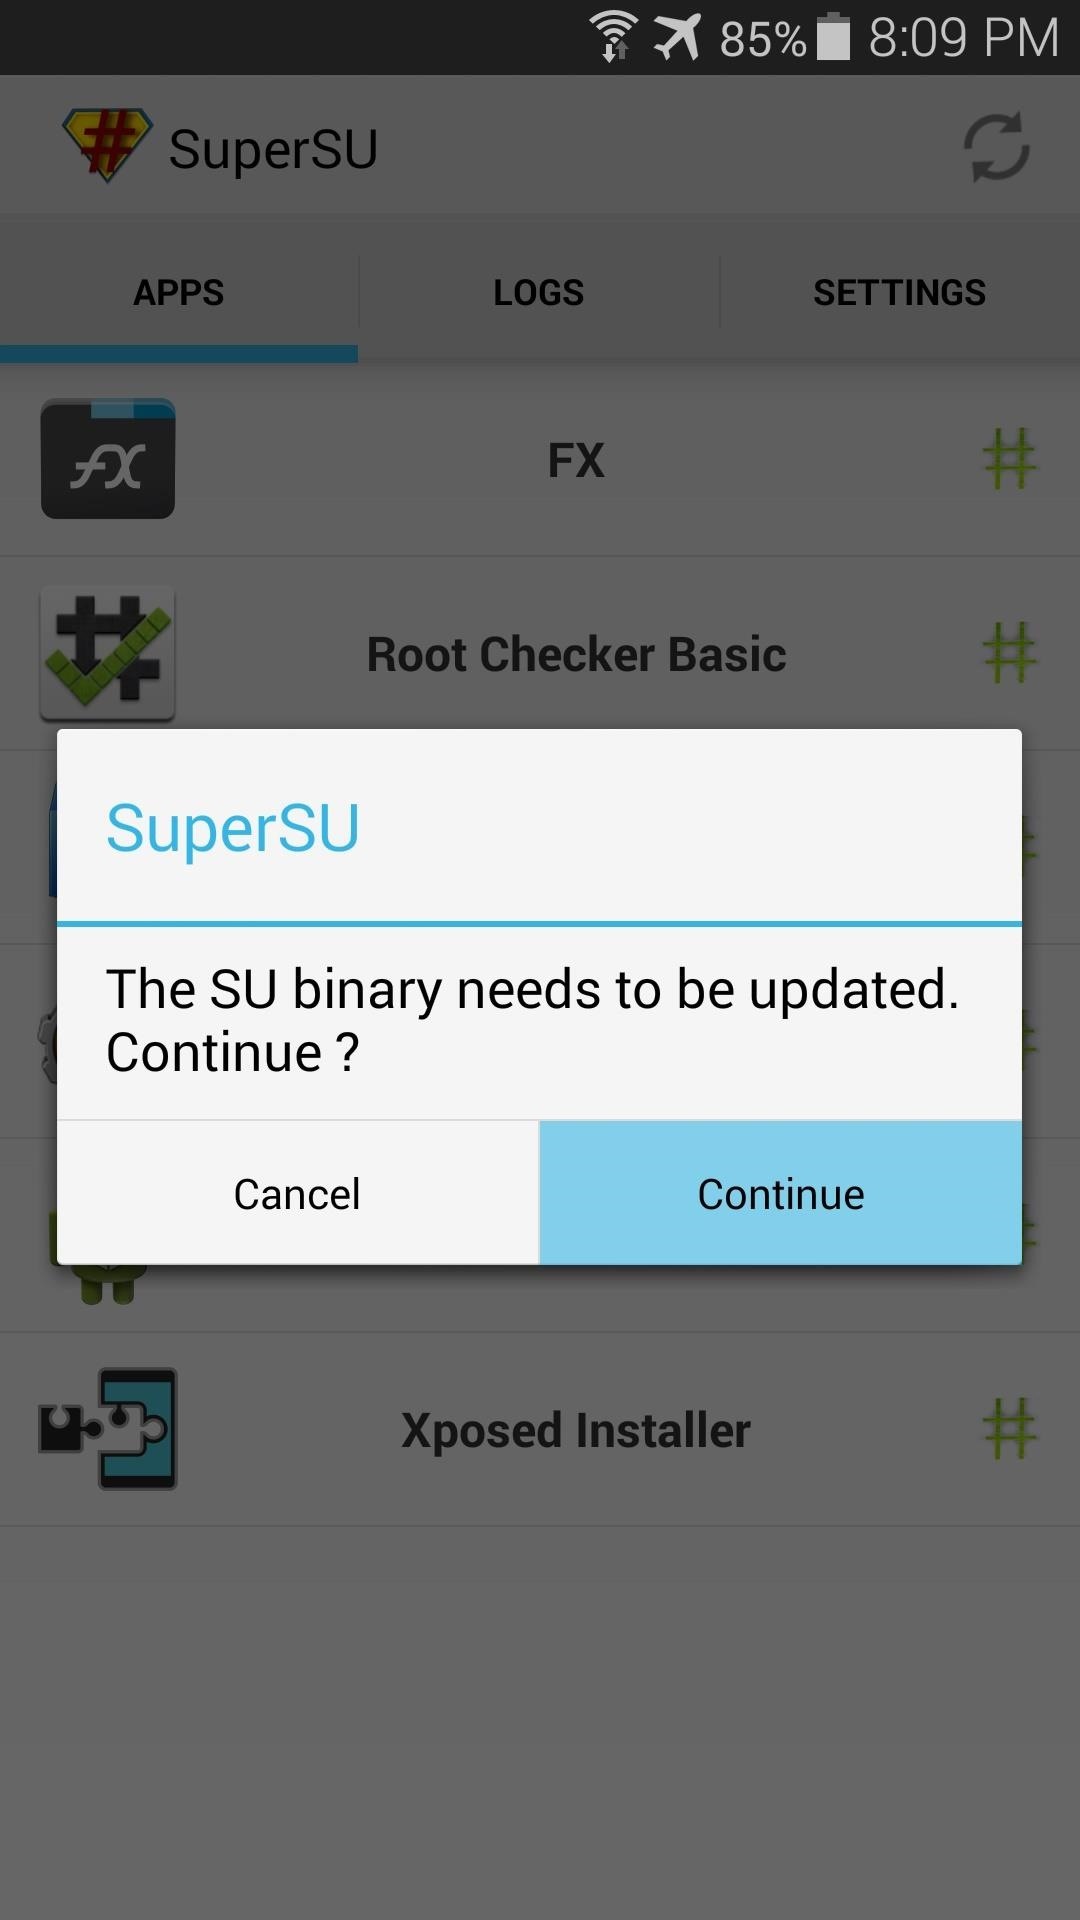 How to Unroot Your Galaxy S5 or Other Android Device